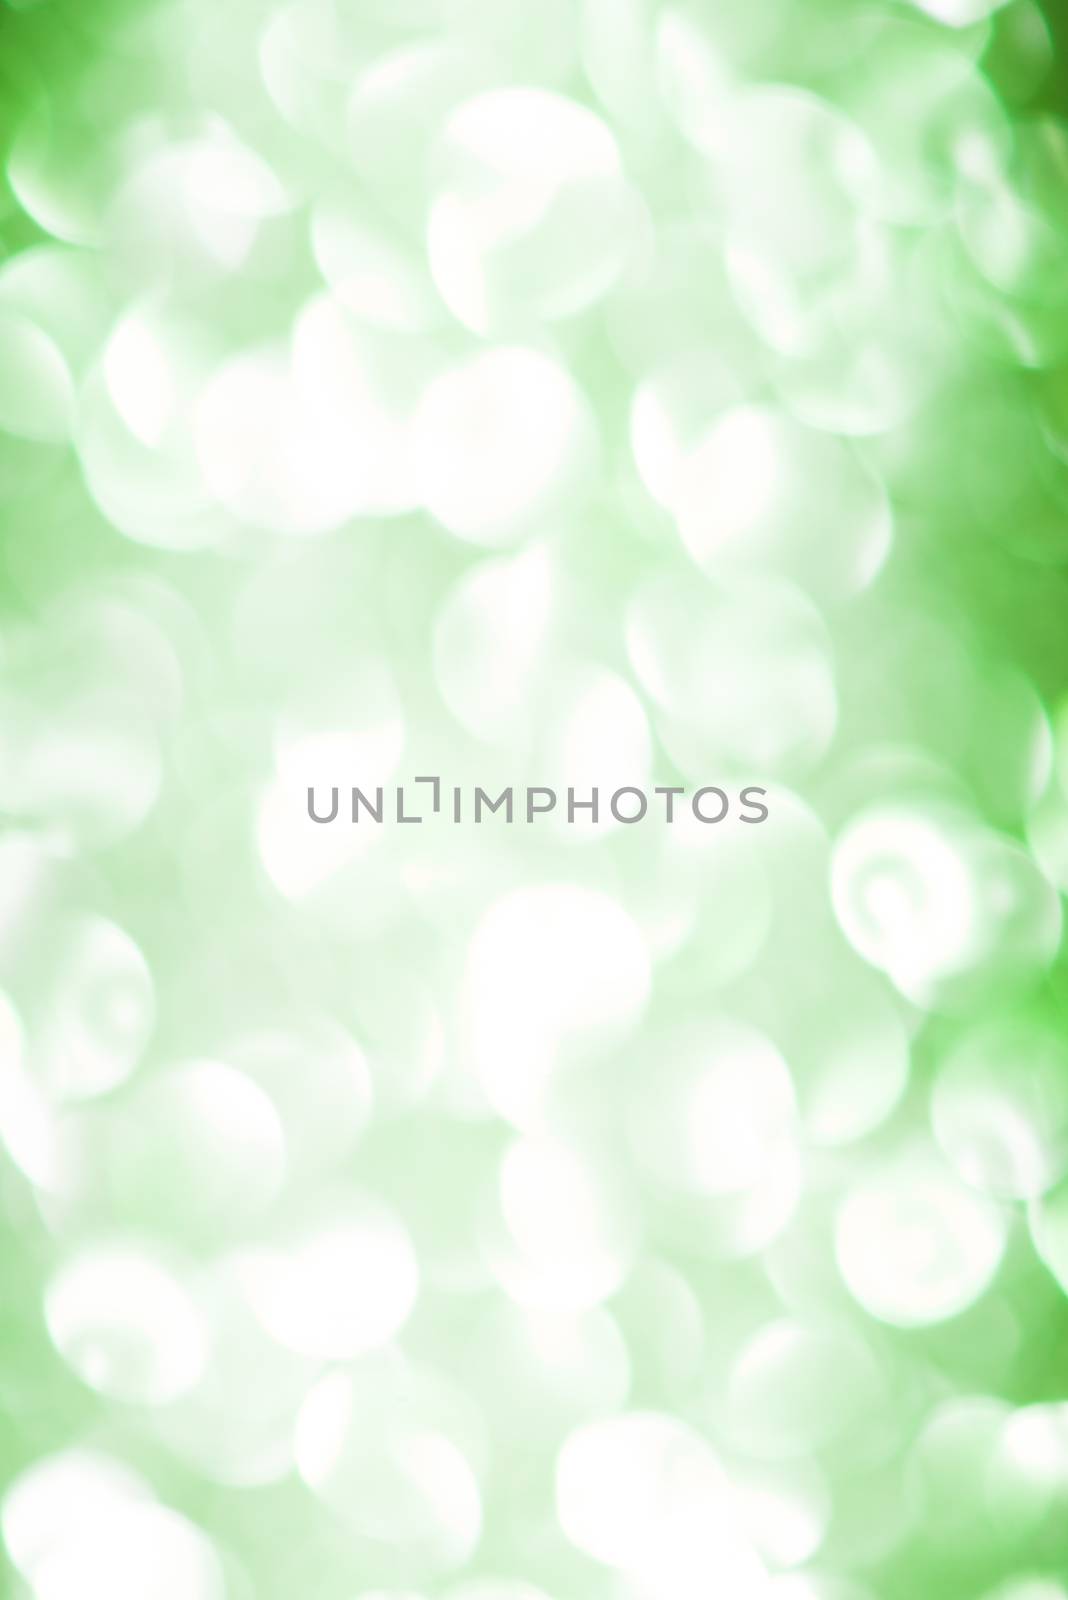 The sparkling blur abstract green background.